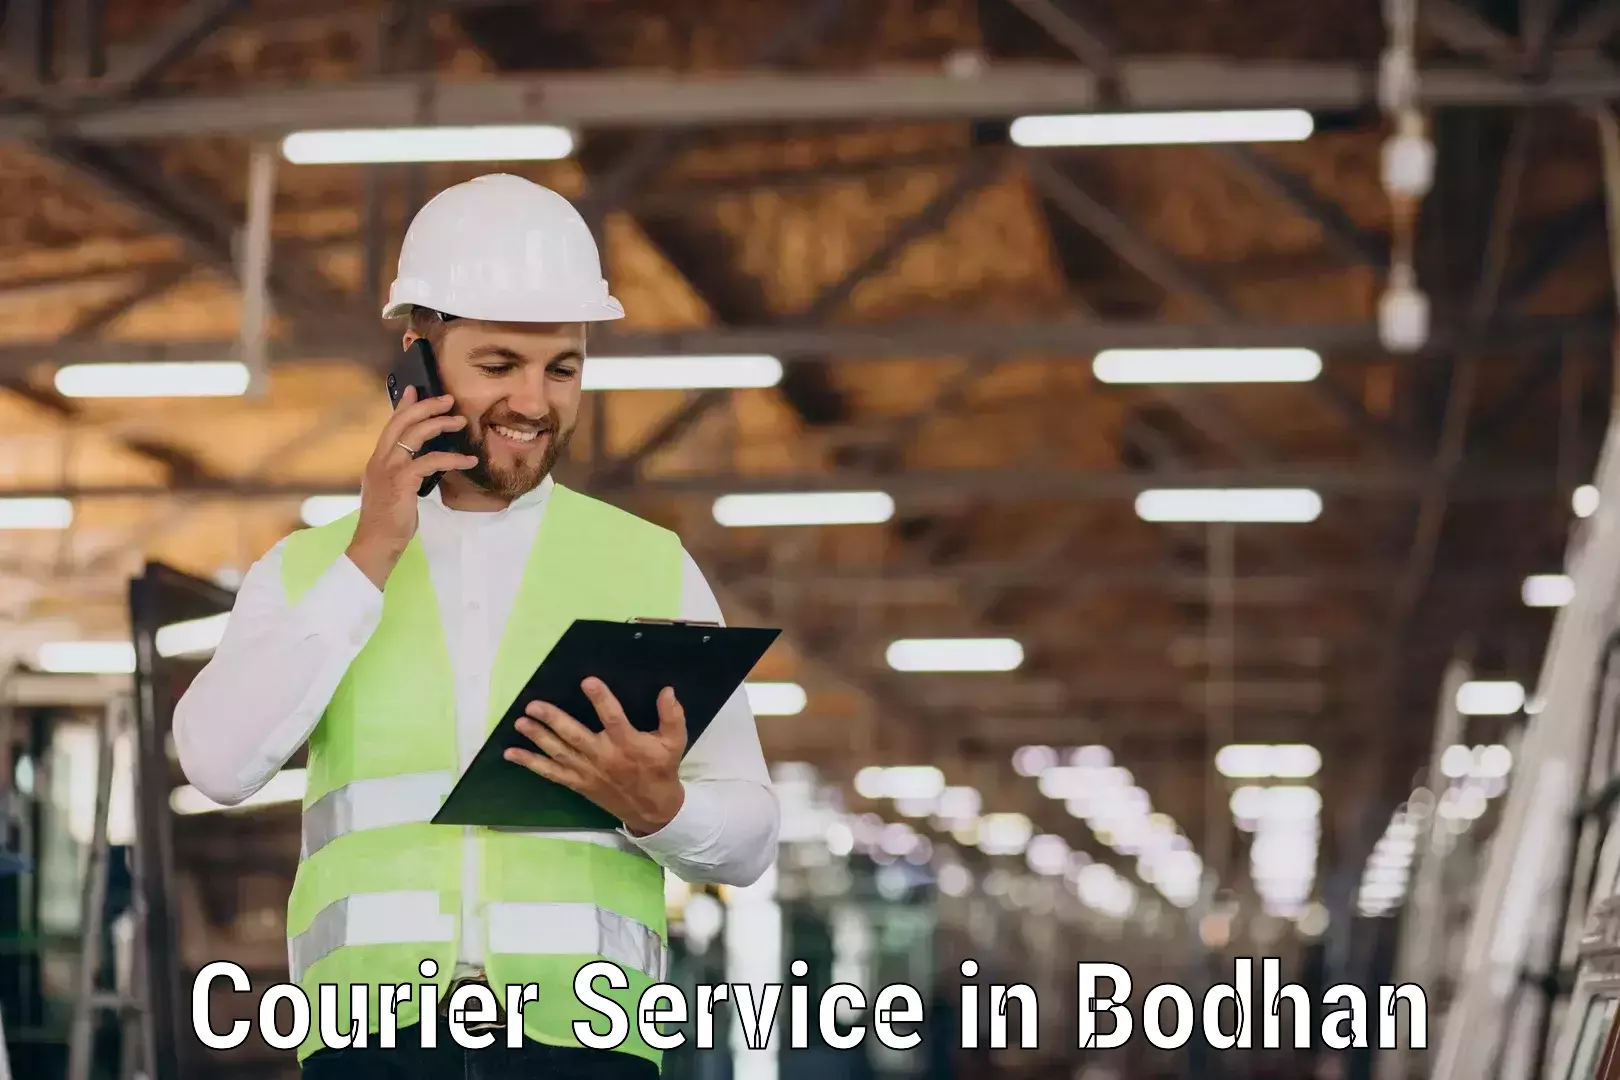 Retail shipping solutions in Bodhan